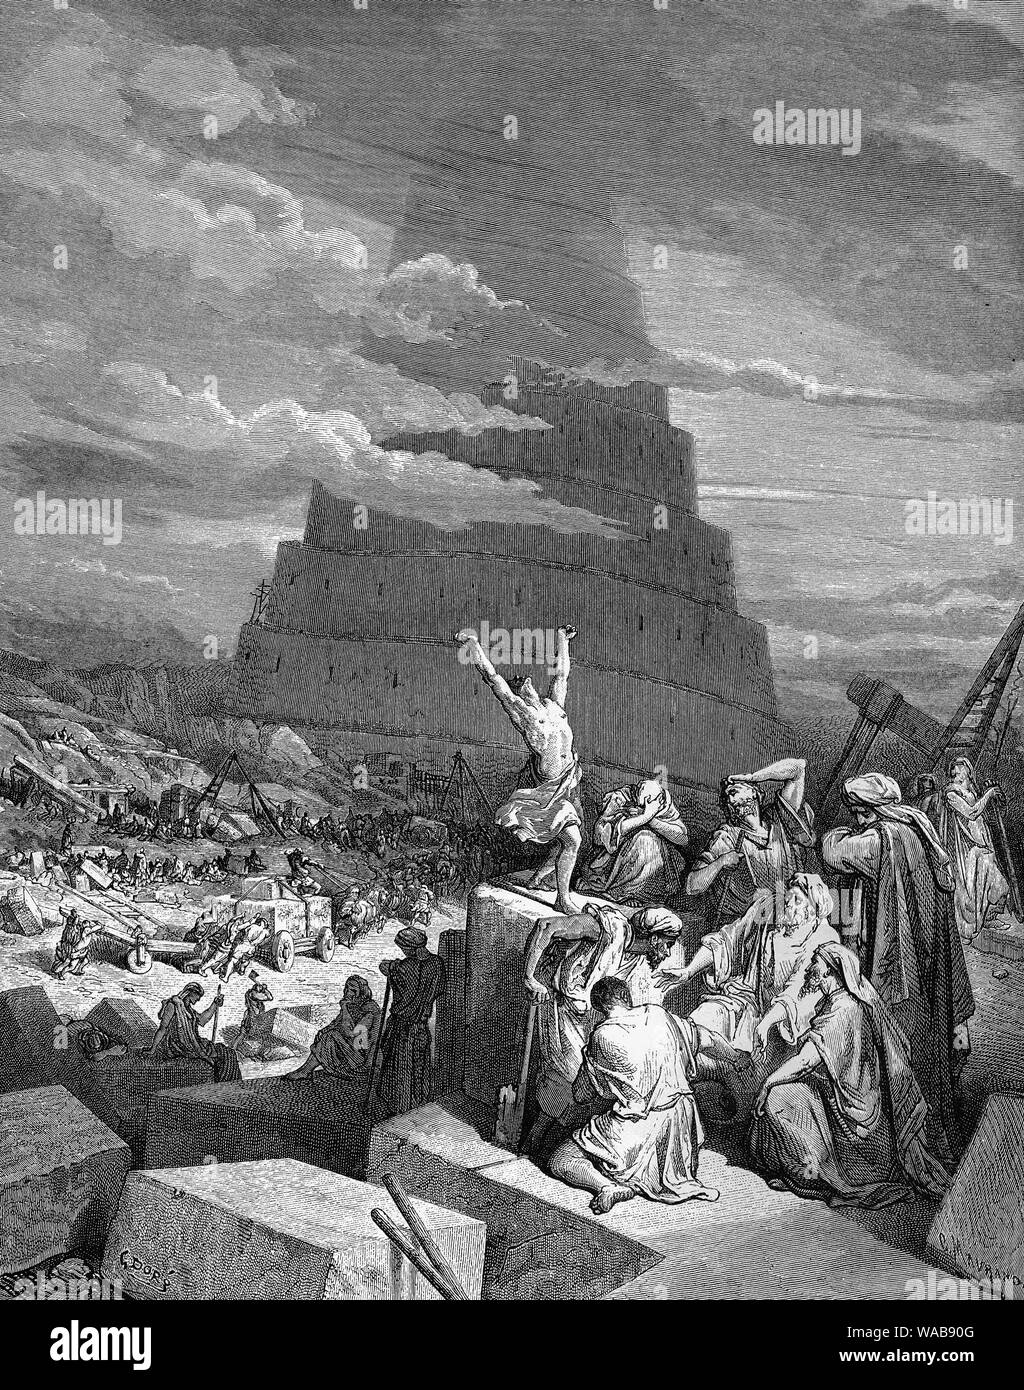 Gustave Doré, The Tower of Babel, engraving, 1866 Stock Photo